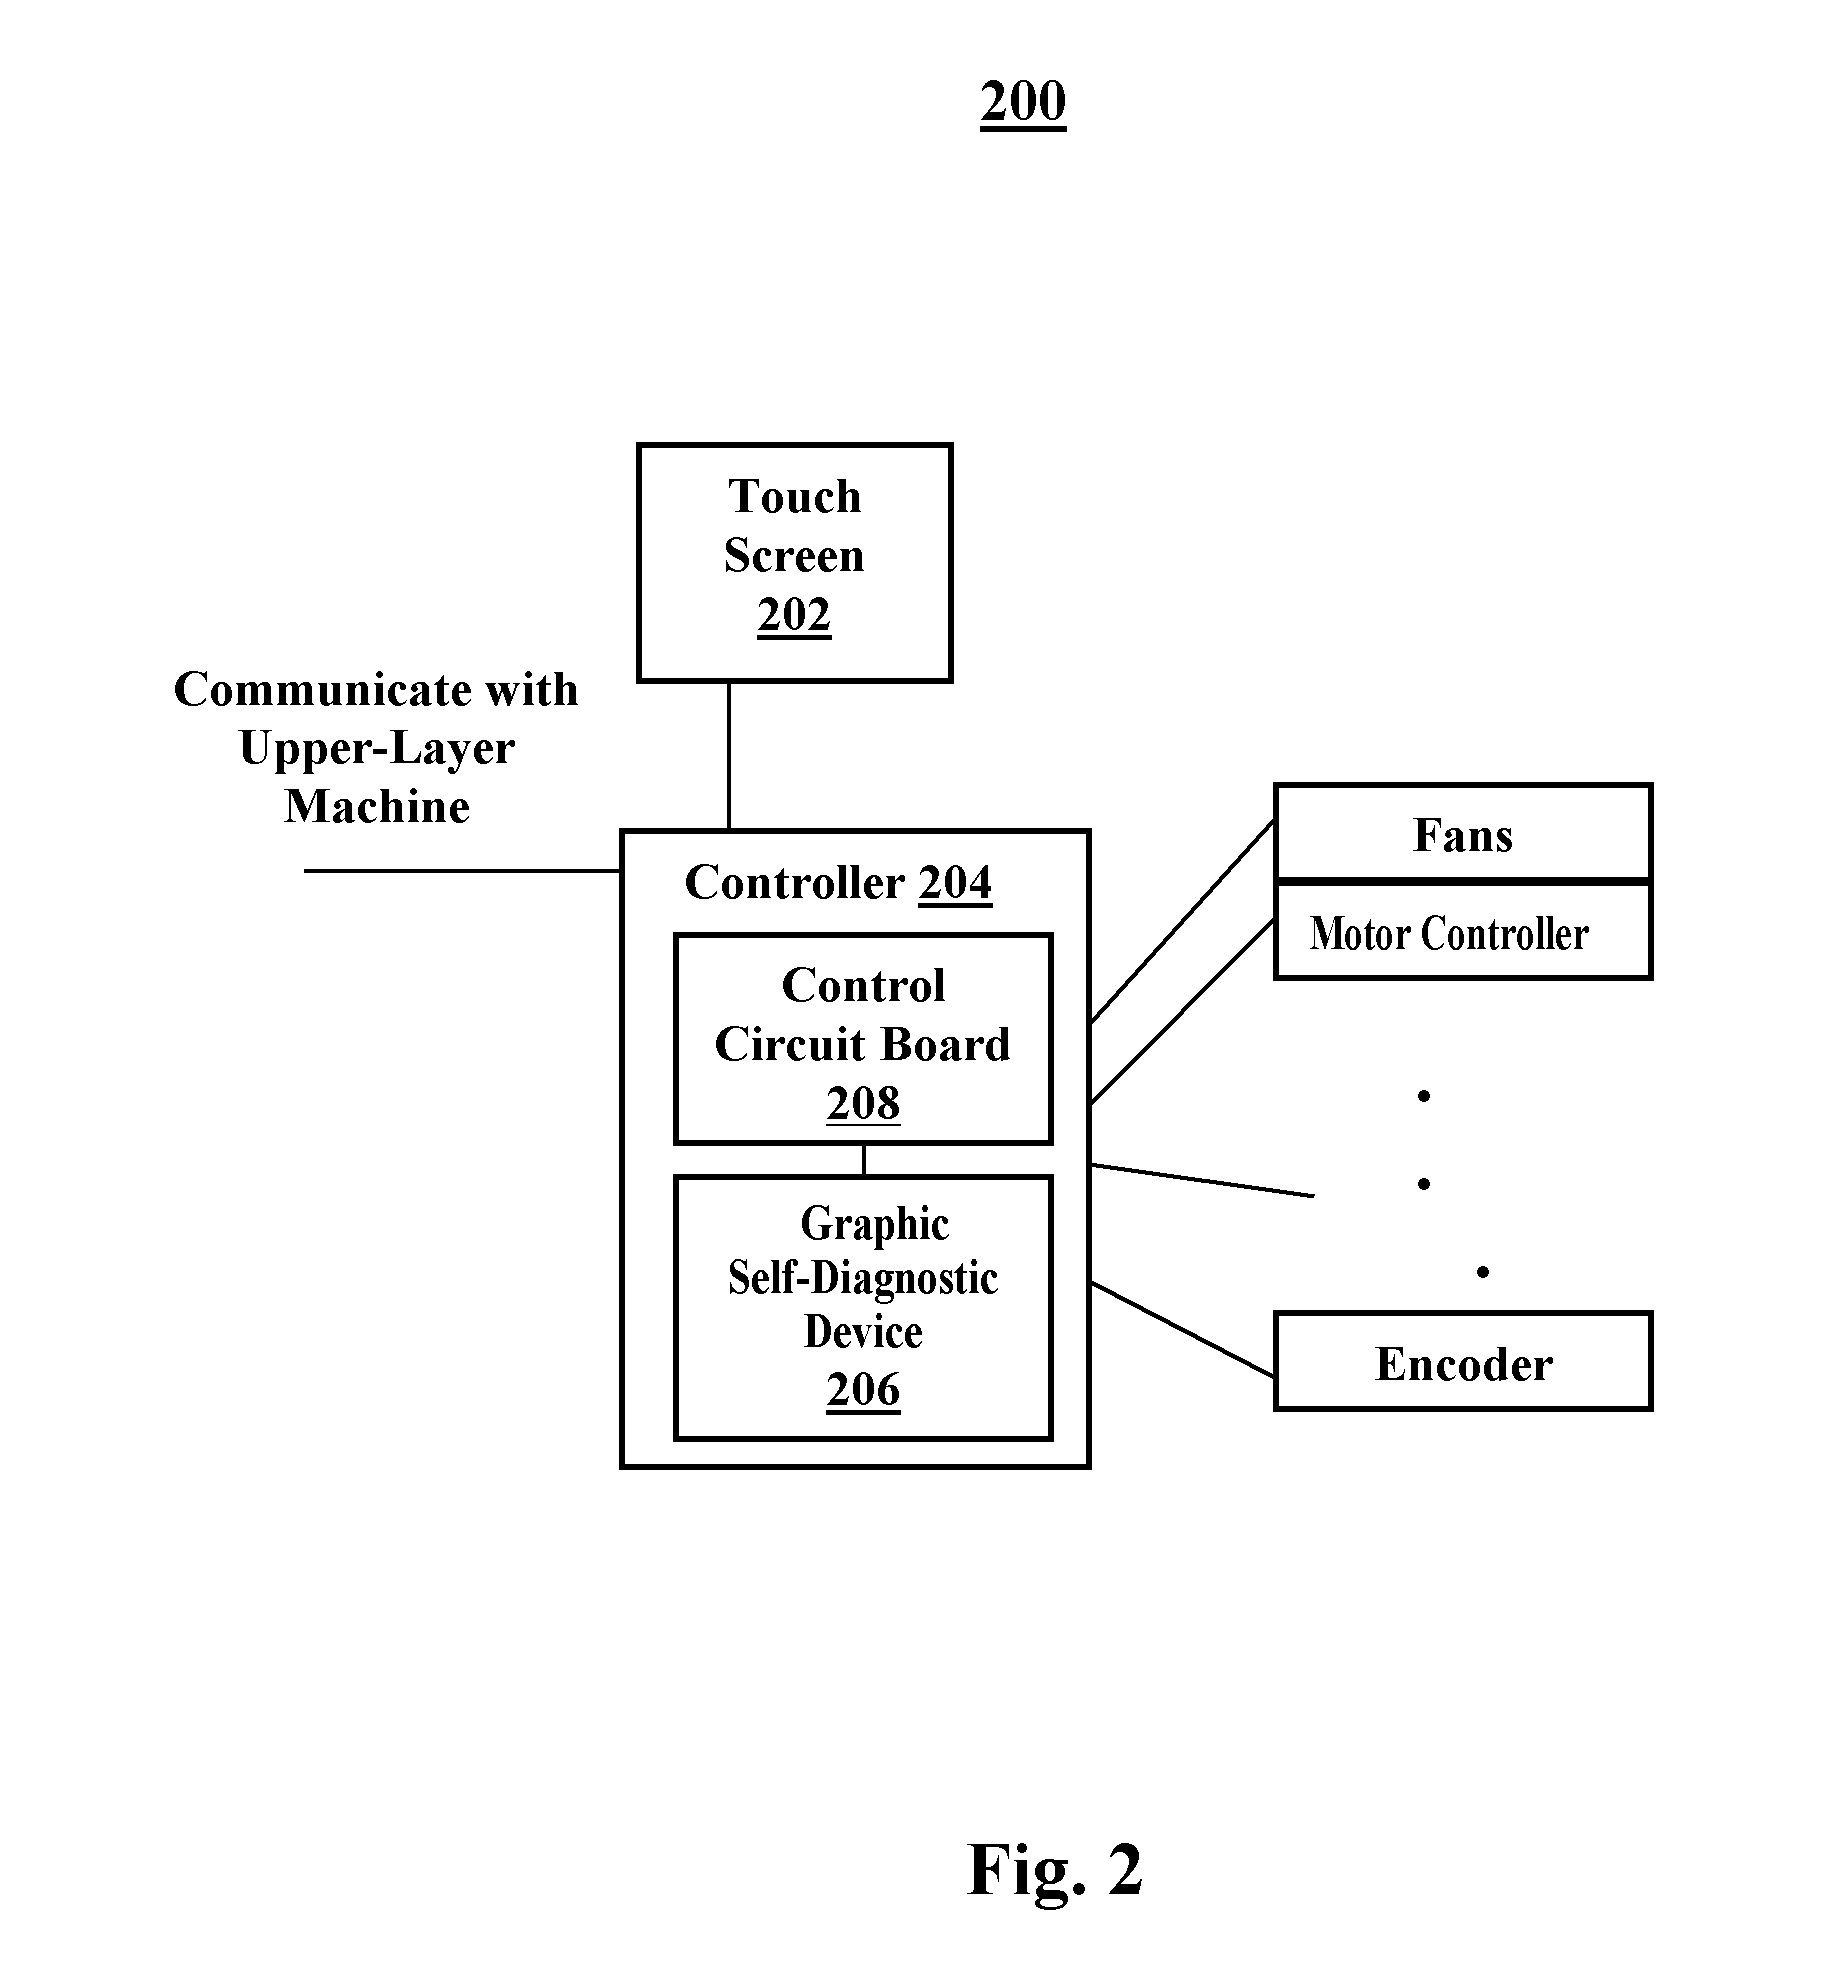 Graphic self-diagnostic system and method